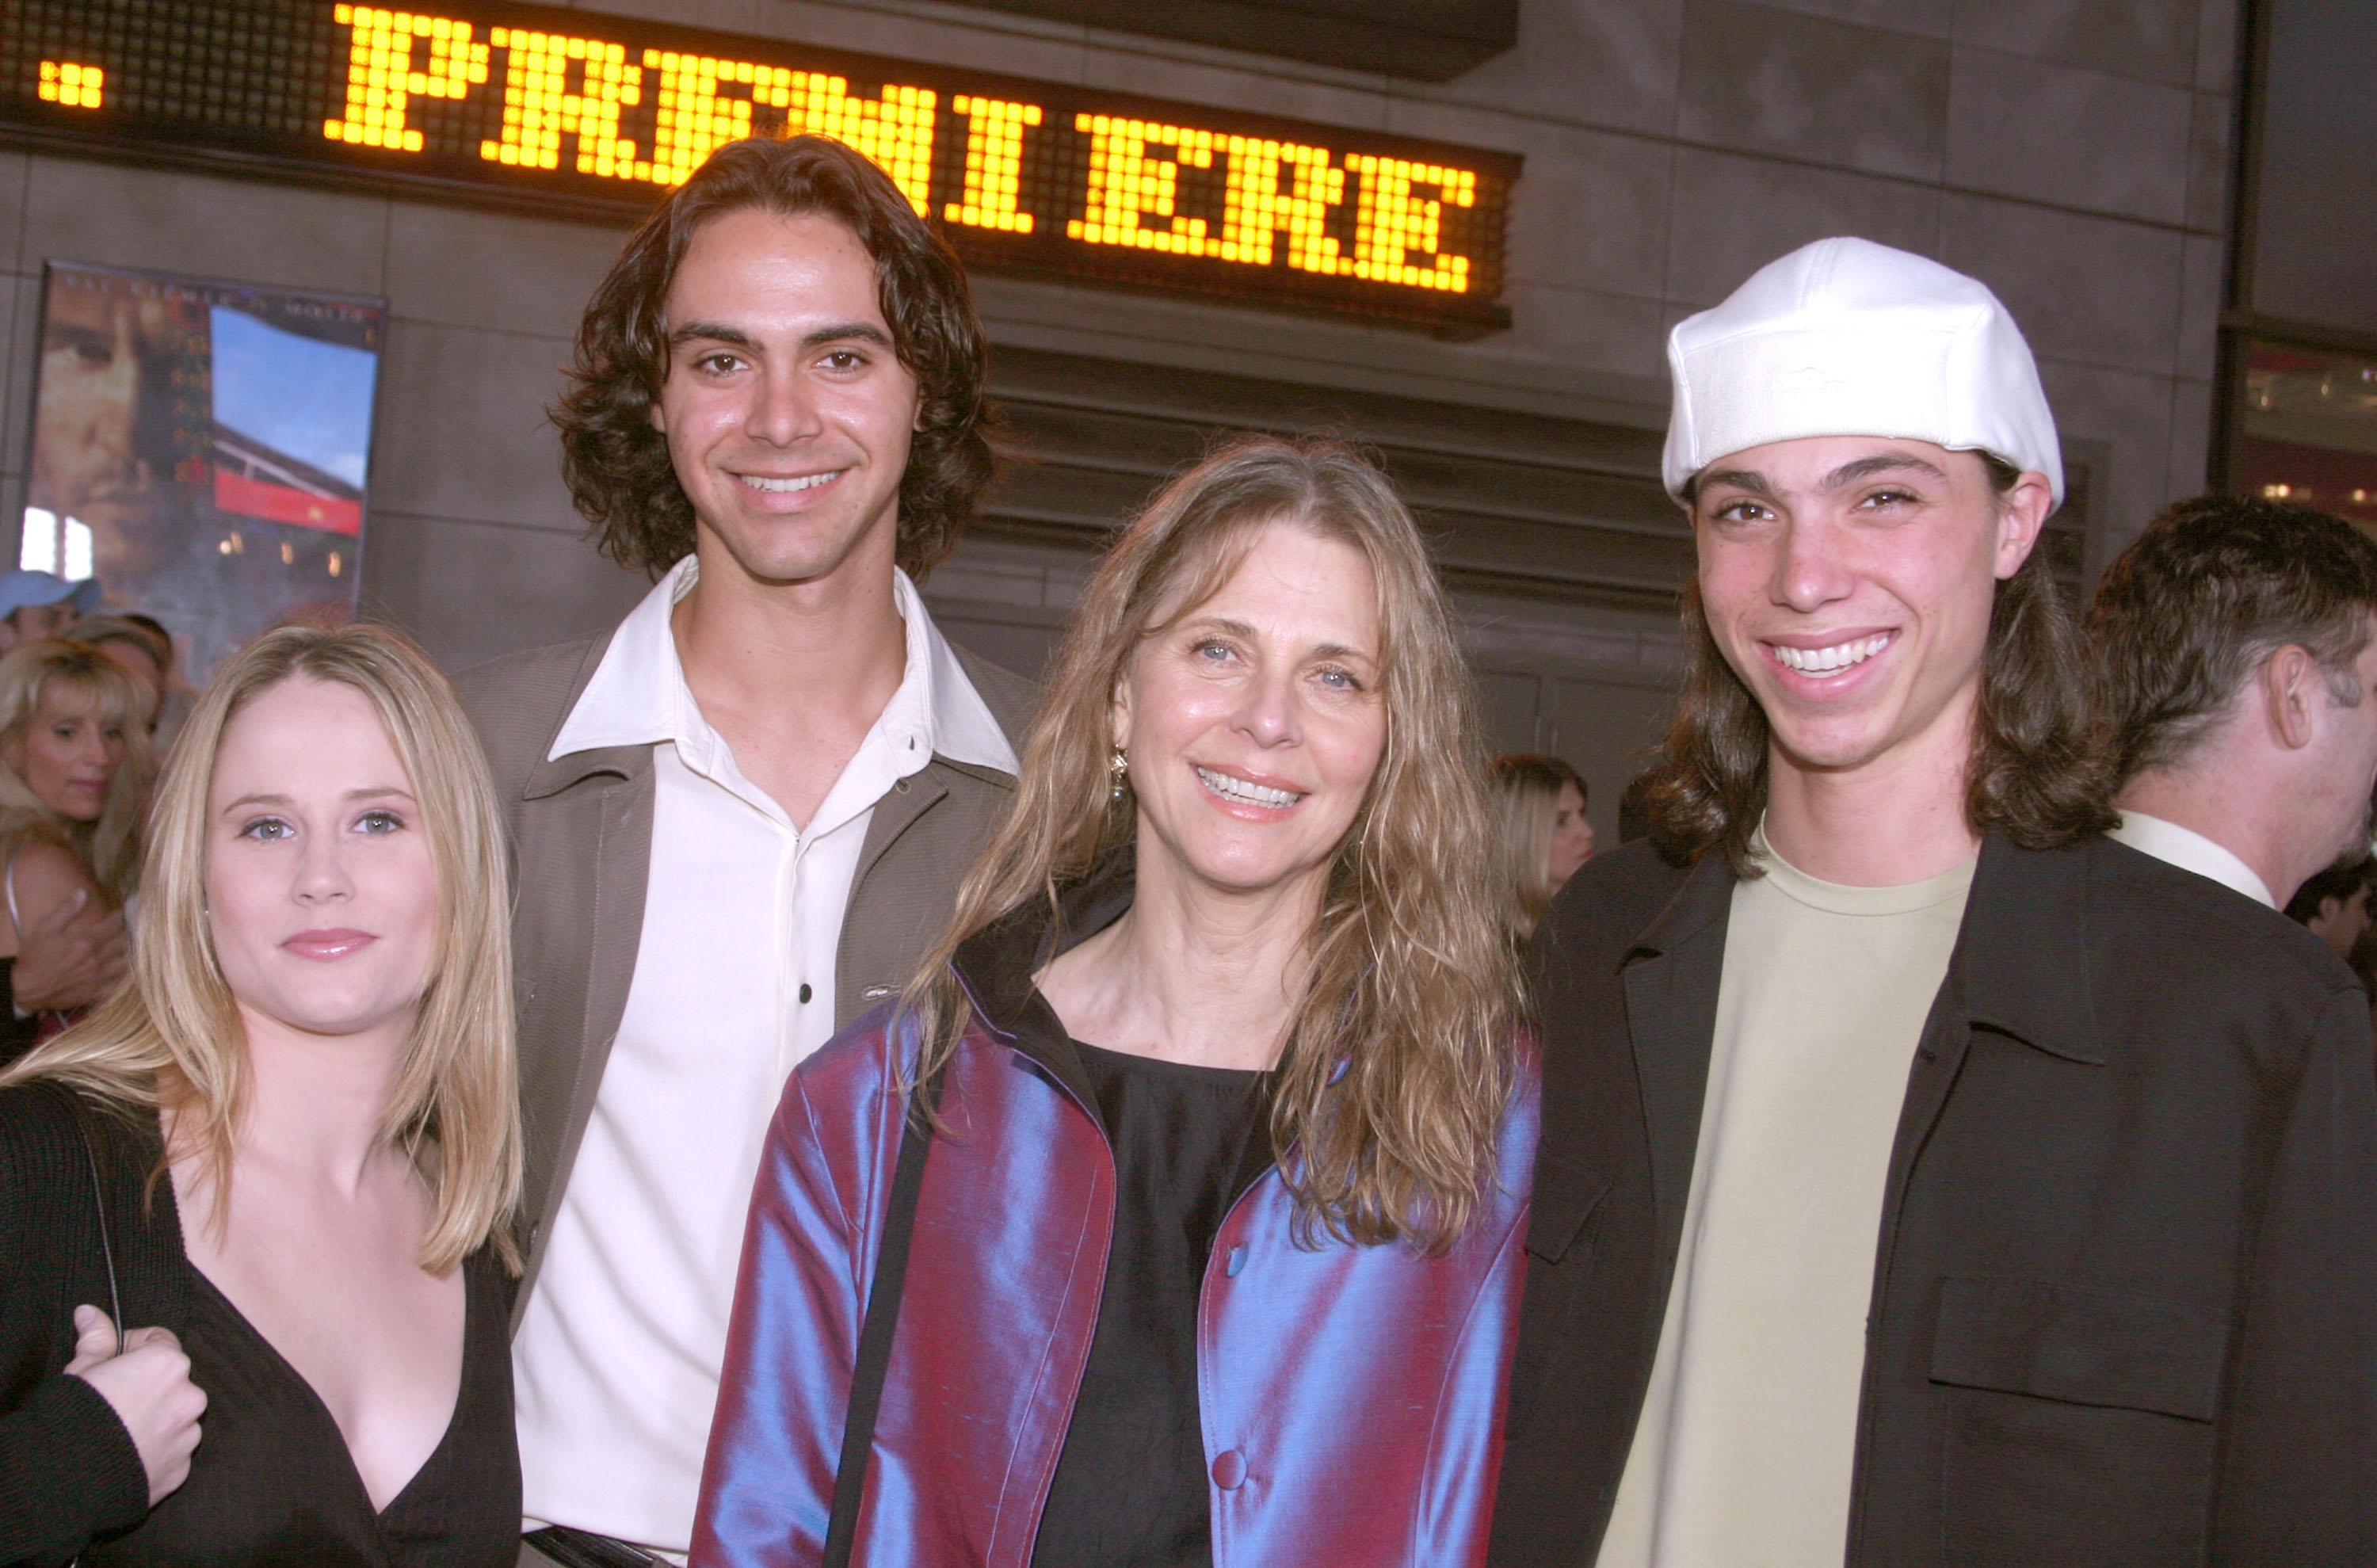 Lindsay Wagner and family in California, United States in 2006 | Source: Getty Images